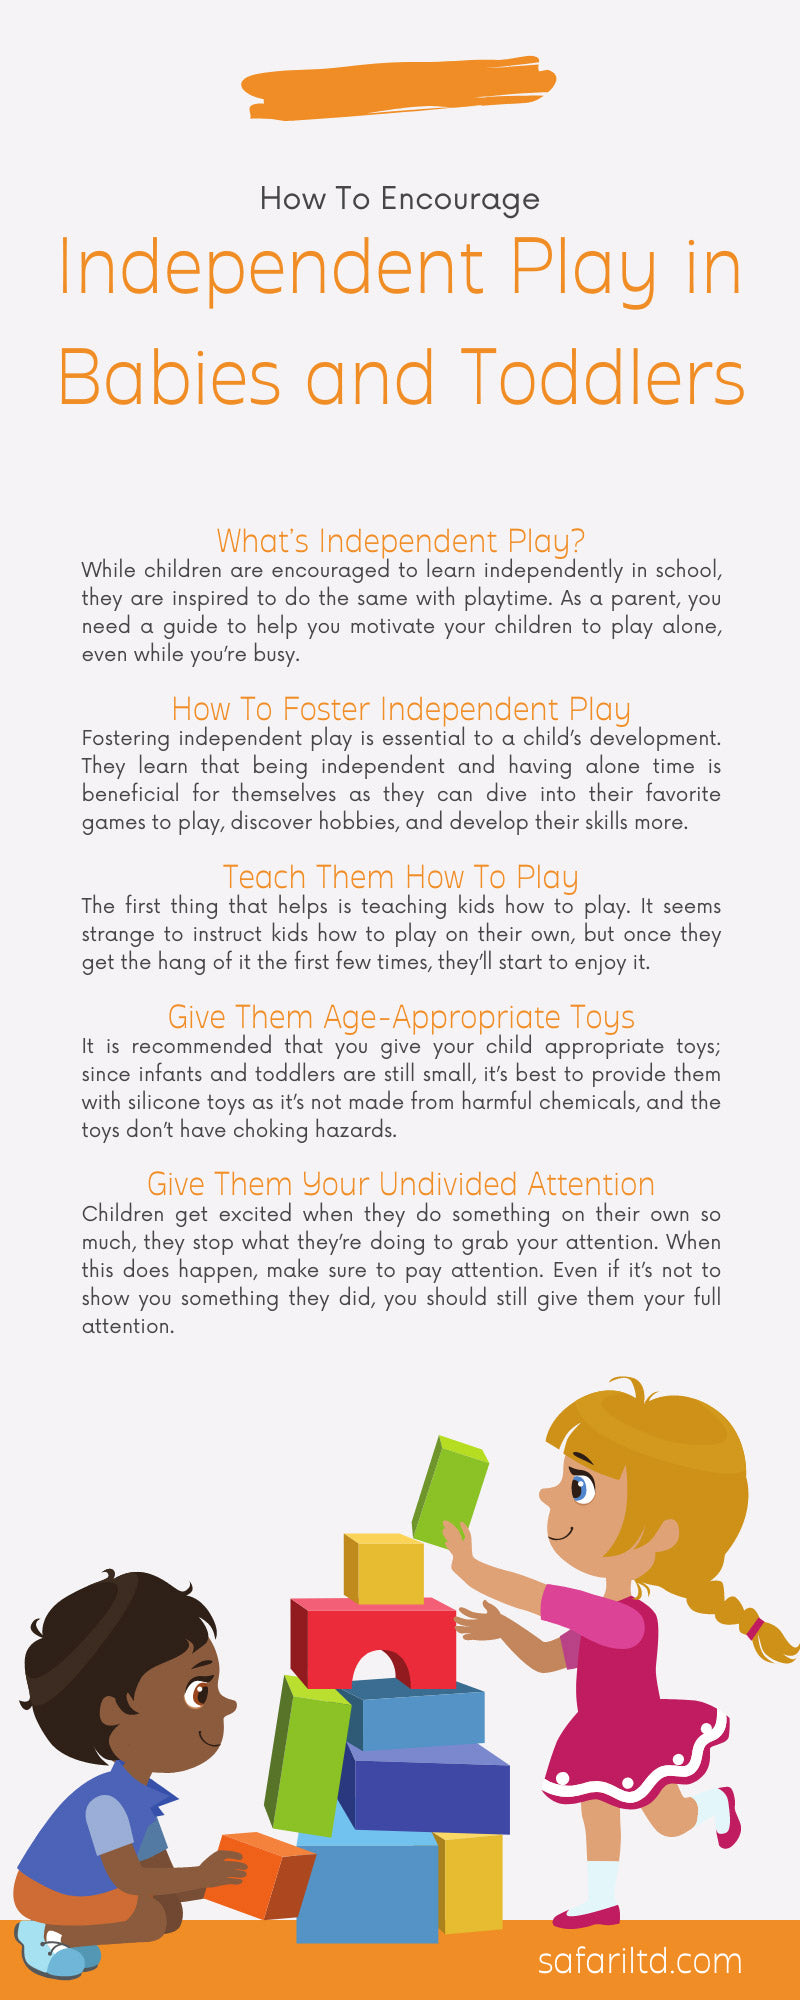 How To Encourage Independent Play in Babies and Toddlers